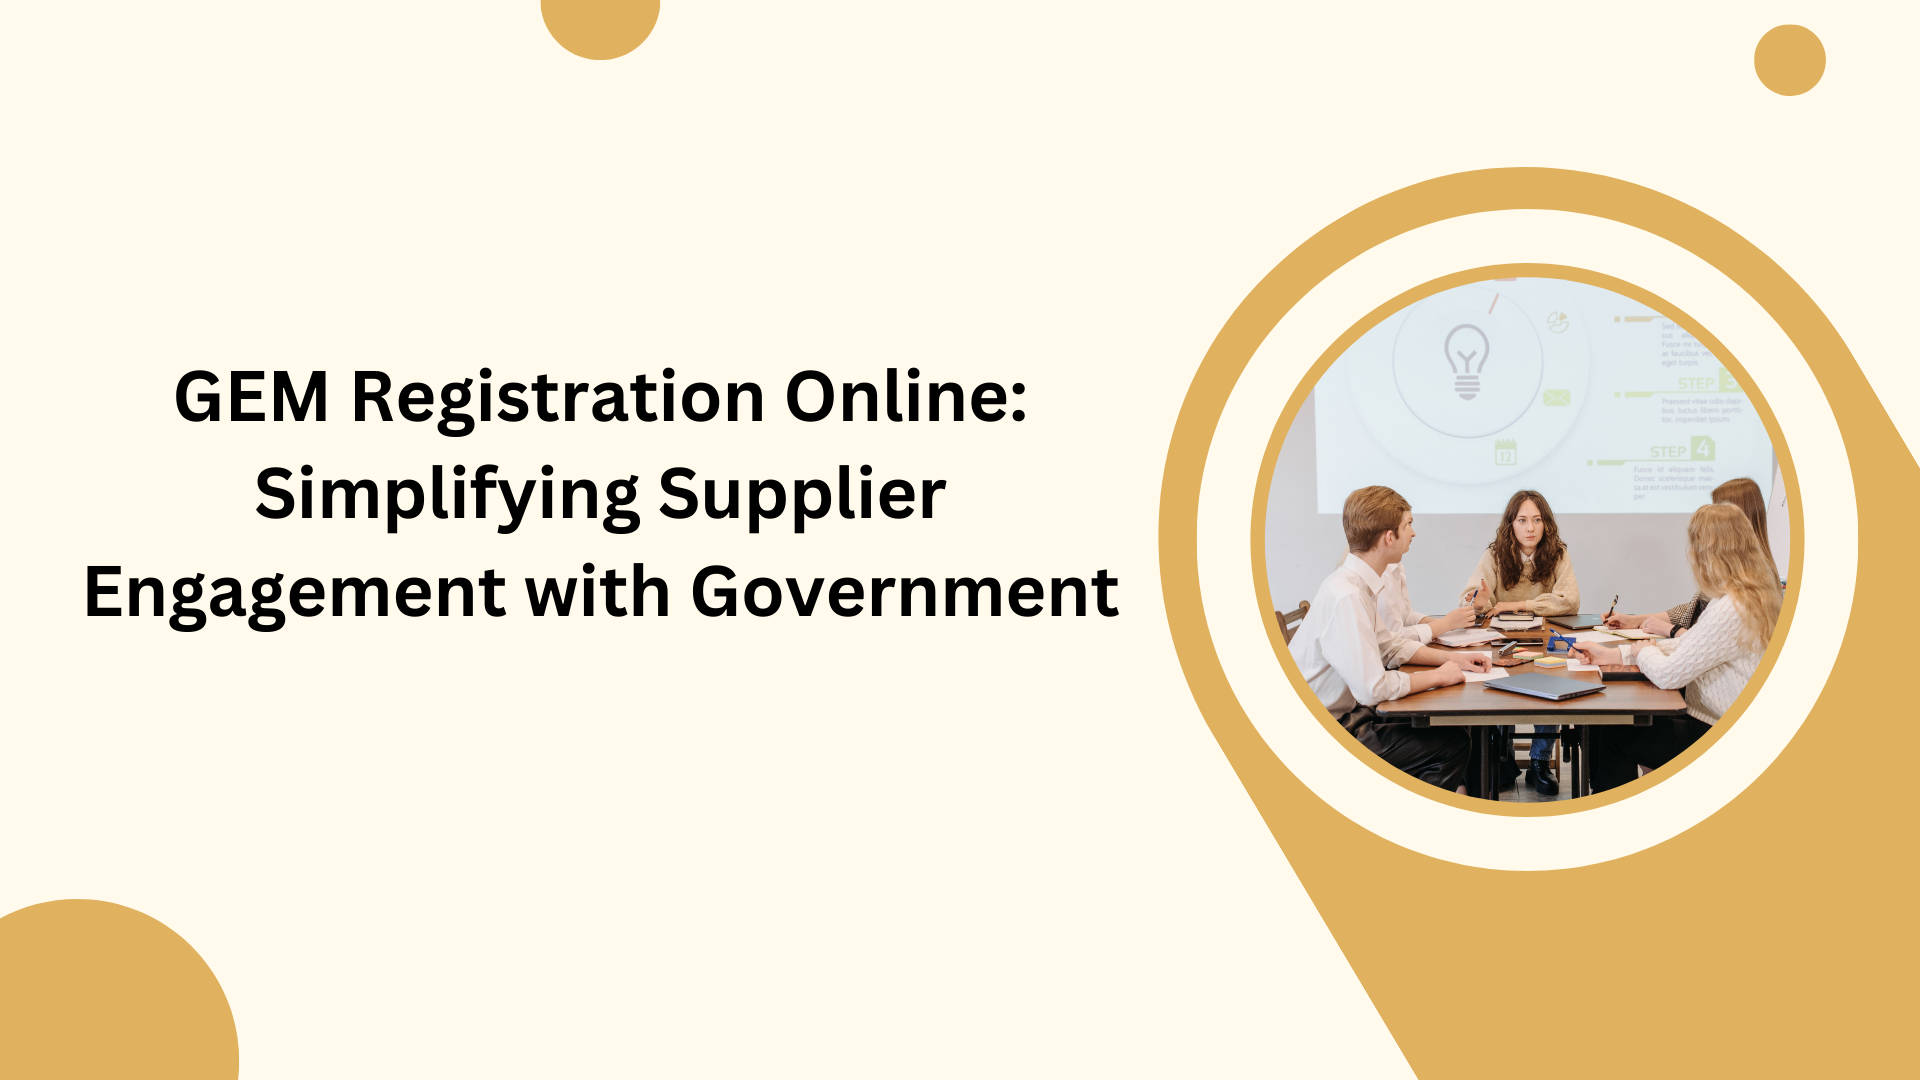 GEM Registration Online: Simplifying Supplier Engagement with Government